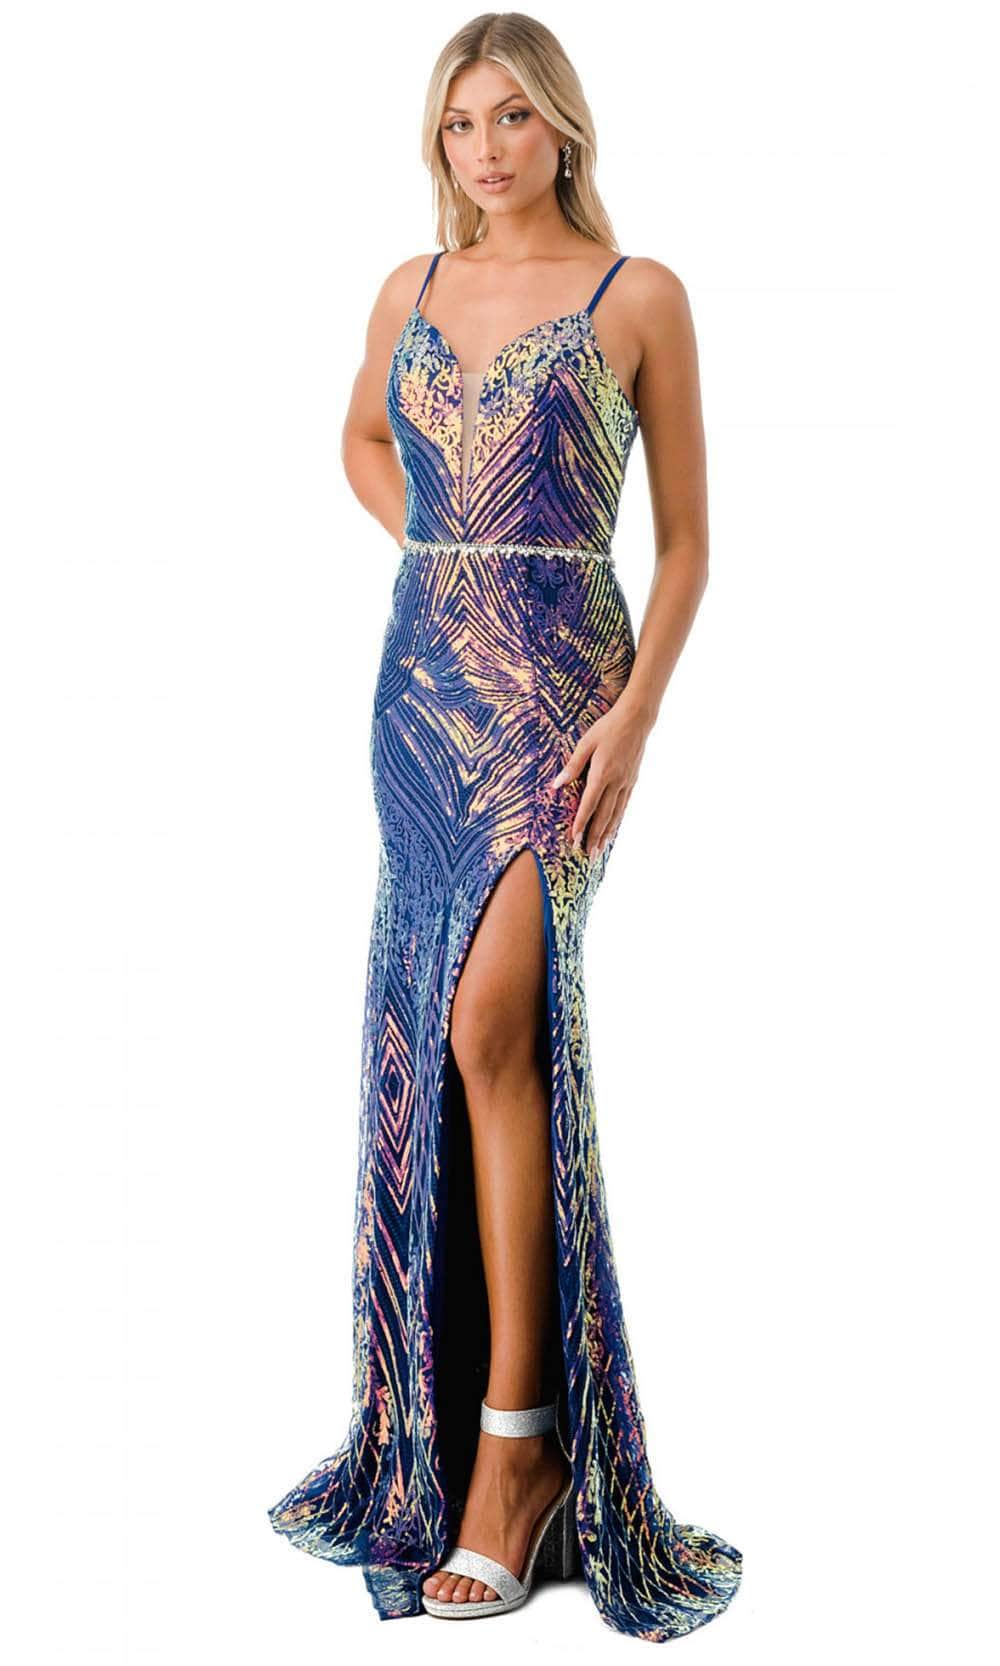 Aspeed Design L2754T - Embellished Evening Gown with Slit
